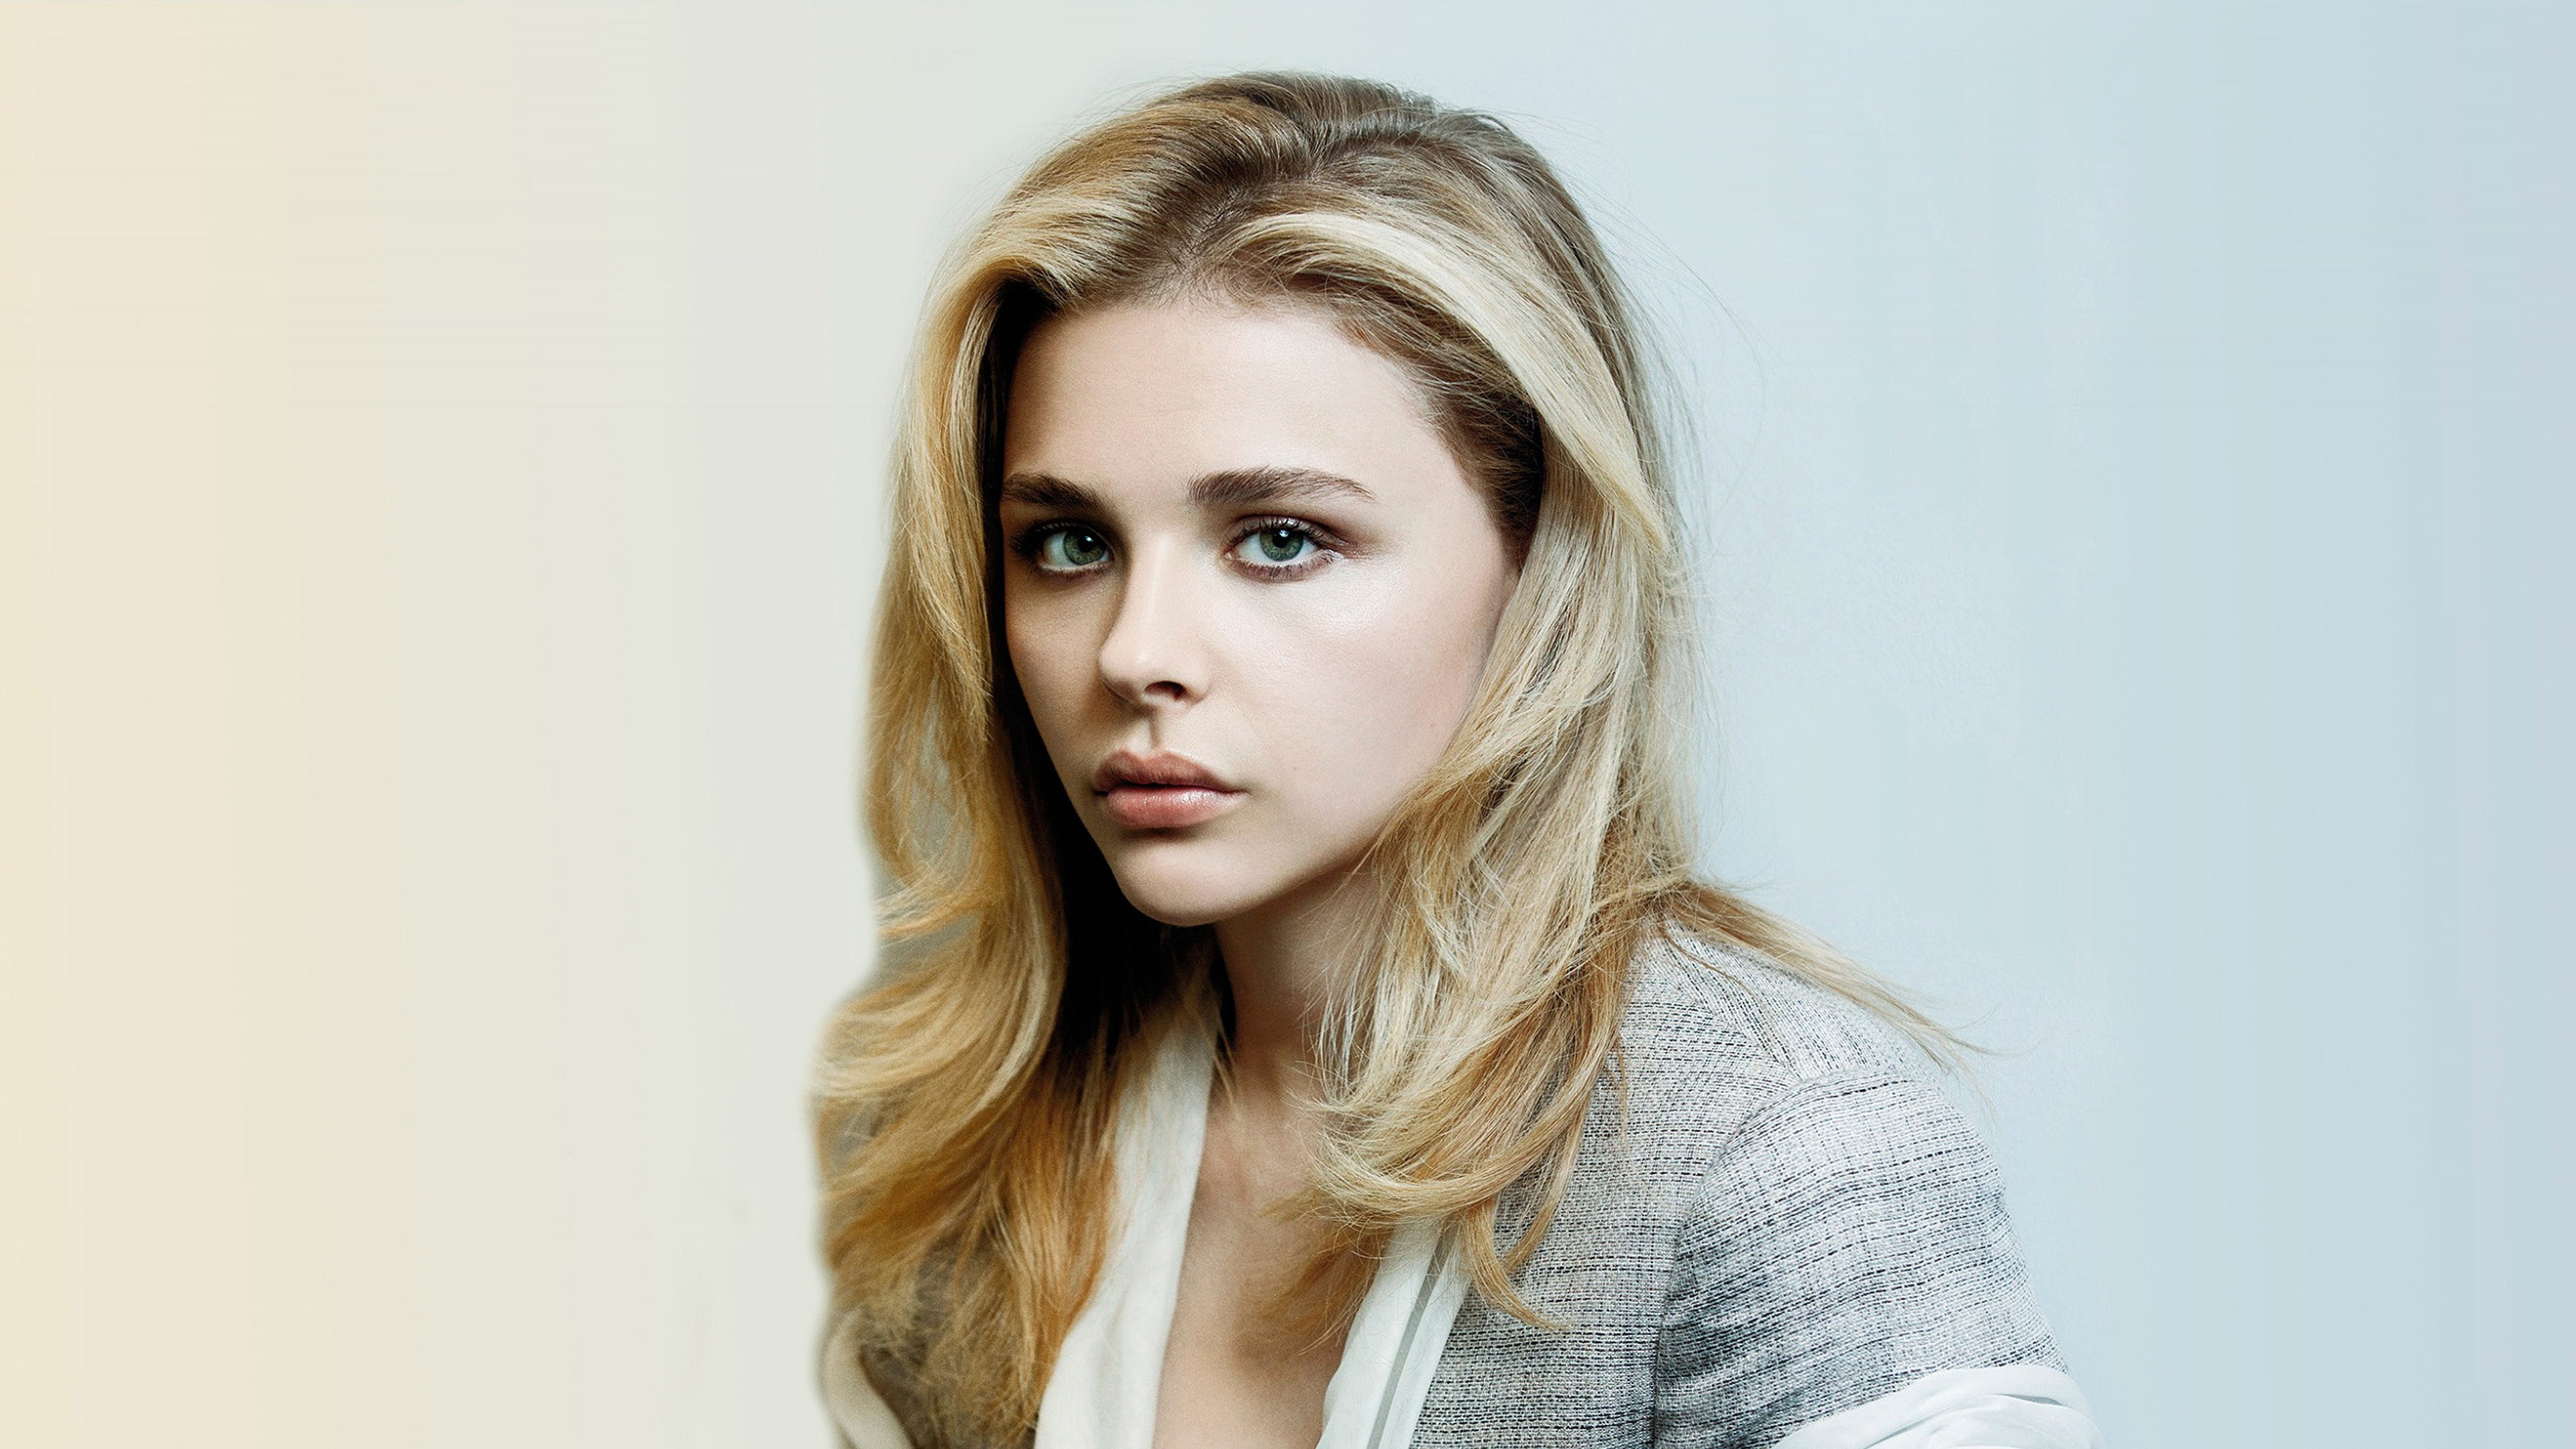 Chloe Moretz: Played Carrie Fuller in a 2006 crime comedy film, Big Momma's House 2. 3840x2160 4K Wallpaper.